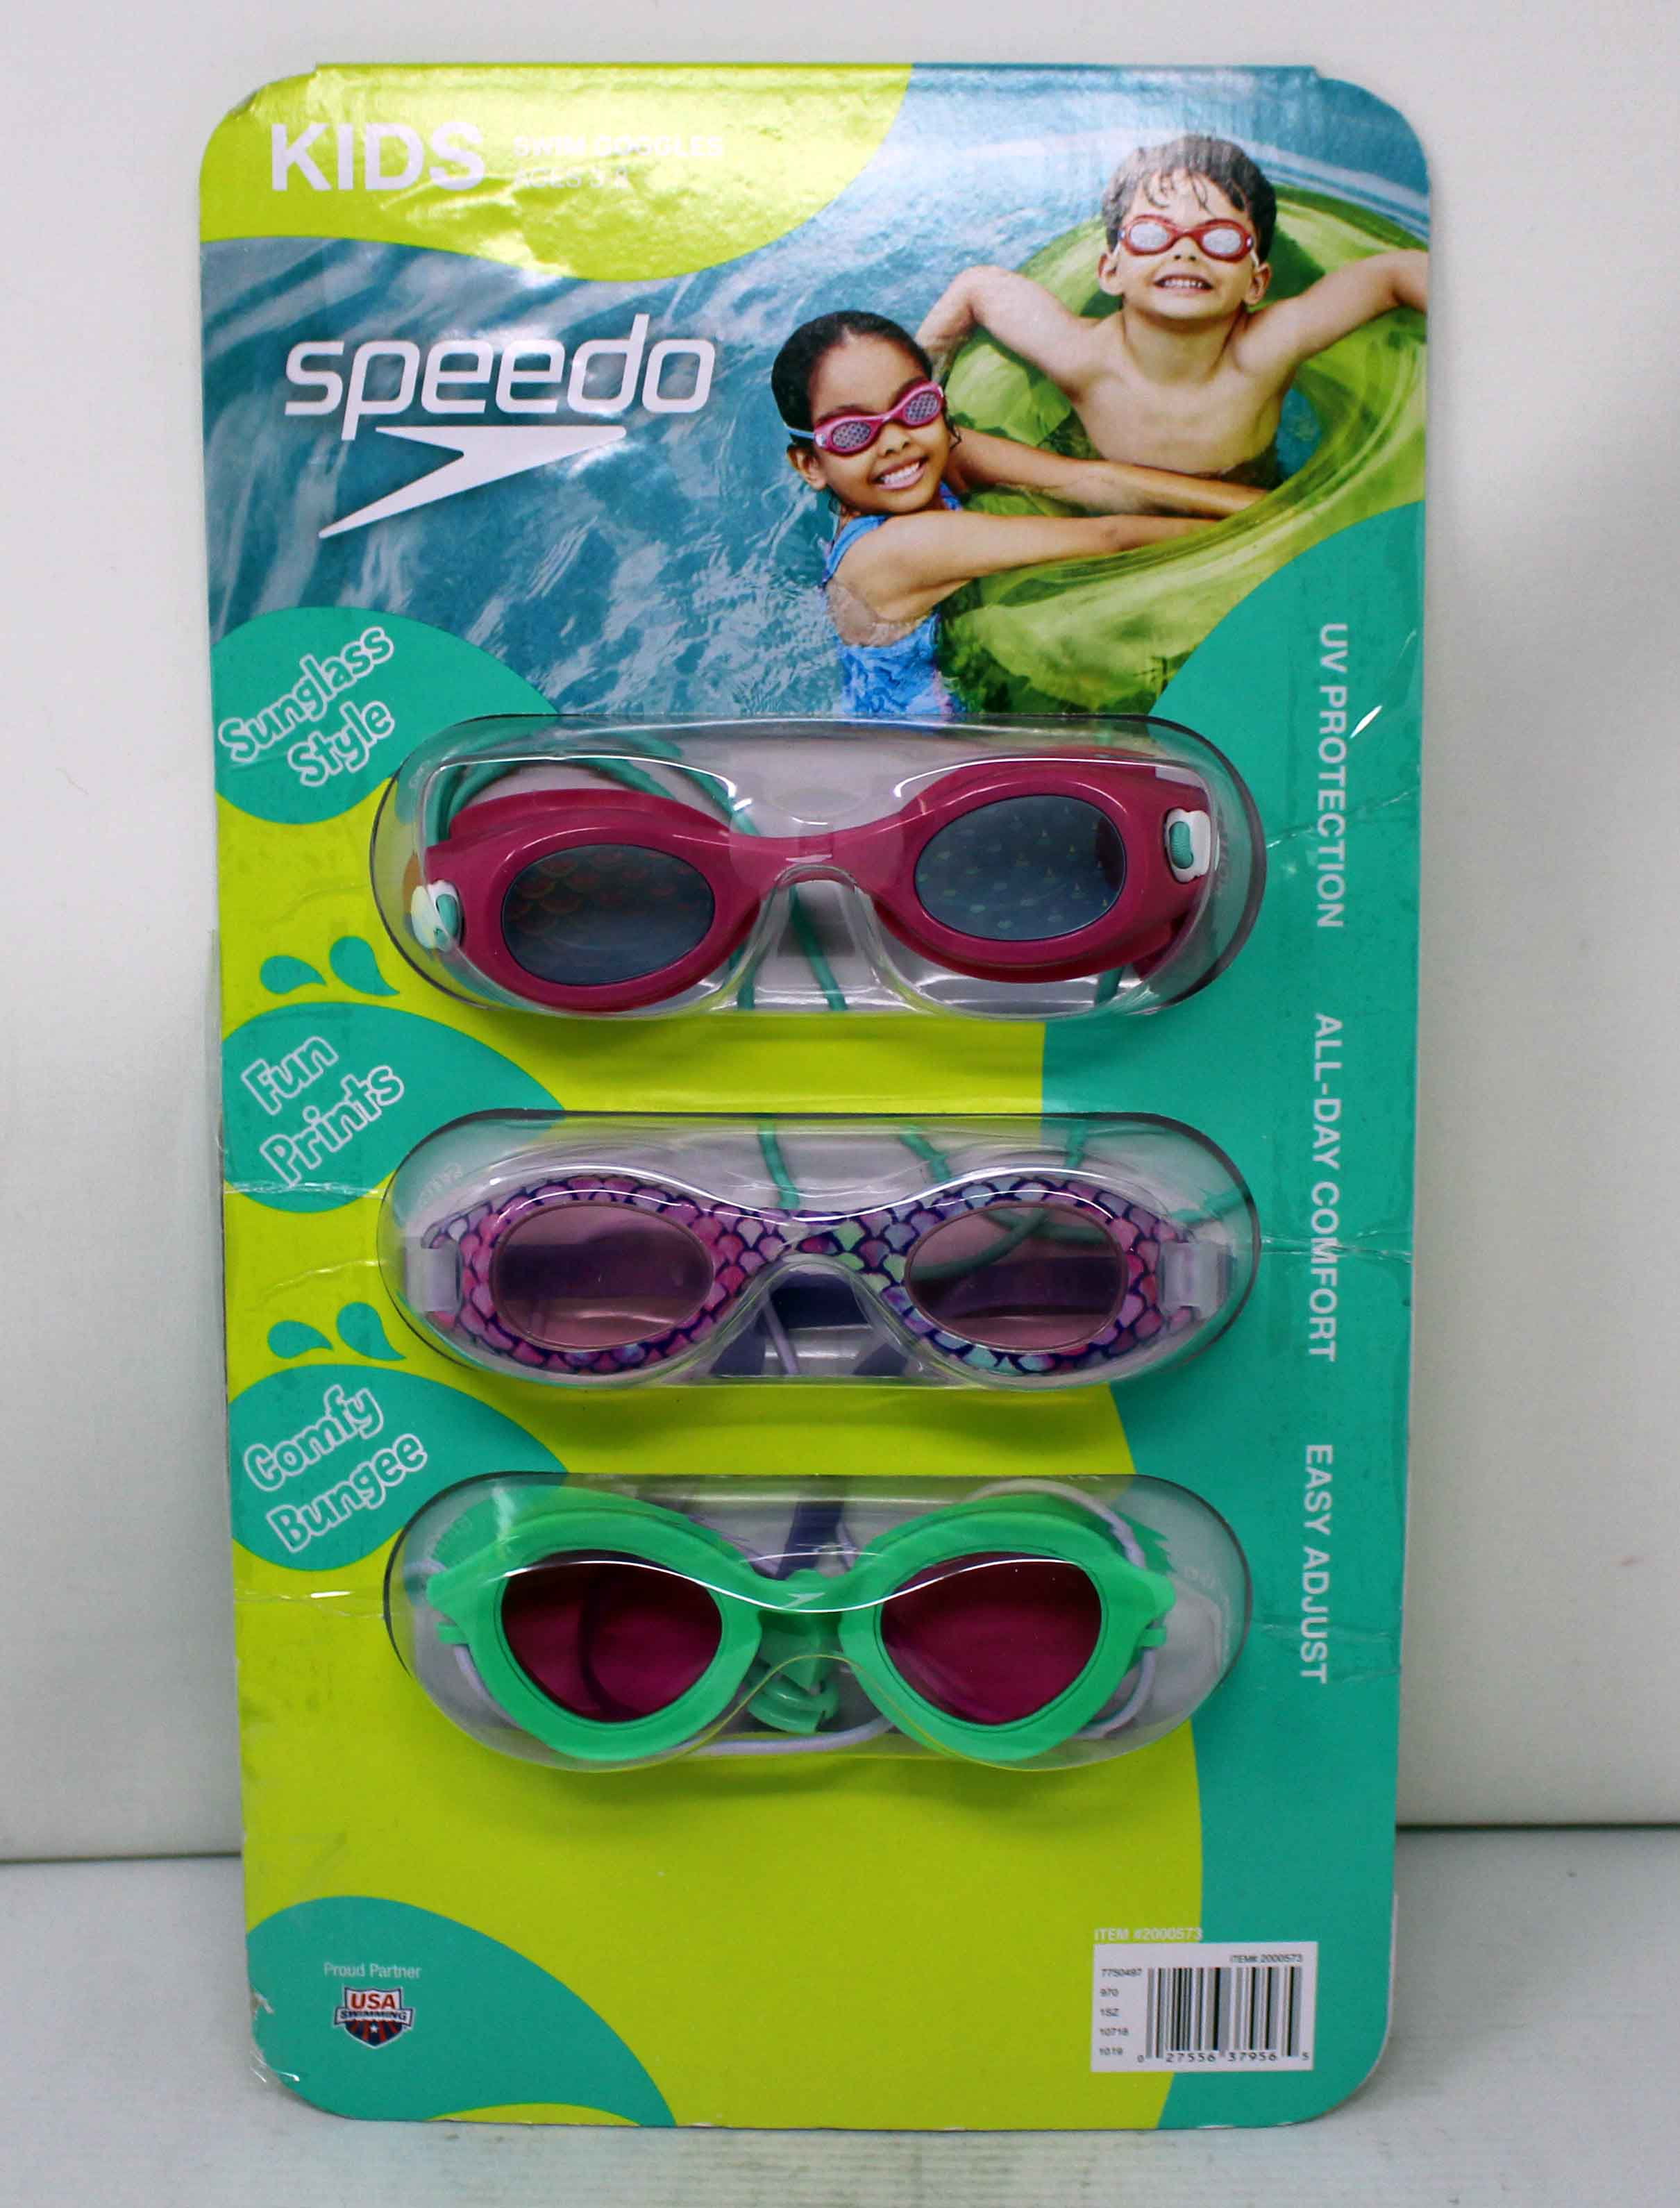 Speedo Splisher Kids Swim Goggles 2 PACK Ages 3-8 Color Red & Pink NEW in pack! 